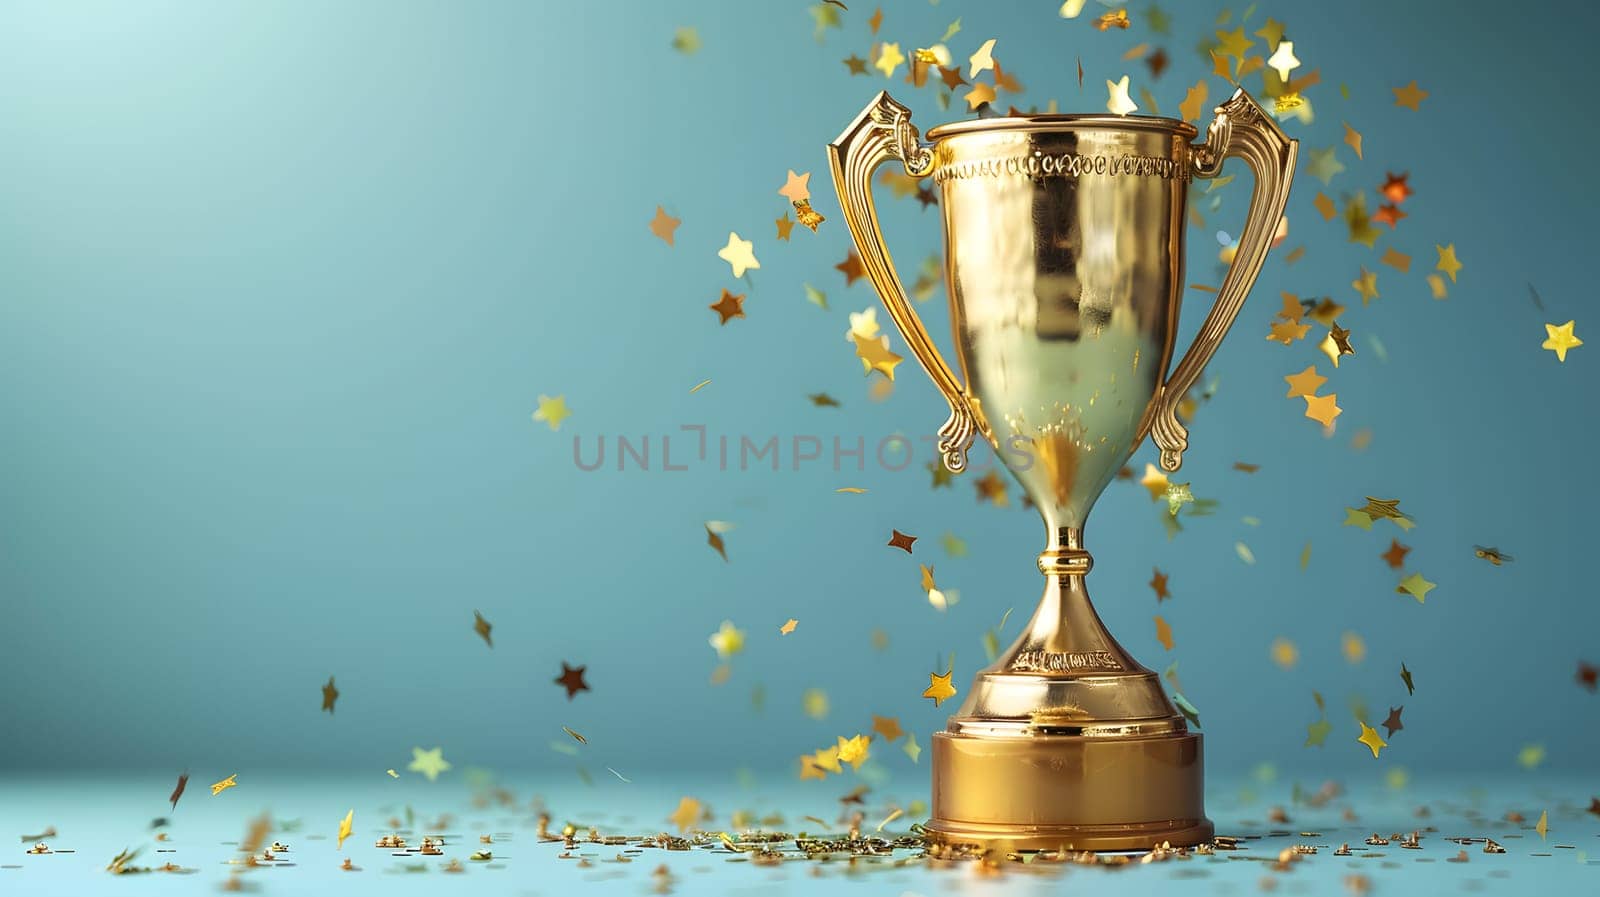 A gold trophy sits atop a table surrounded by shimmering gold confetti against a blue backdrop, reminiscent of luxurious celebrations with elegant stemware and bubbly alcoholic beverages